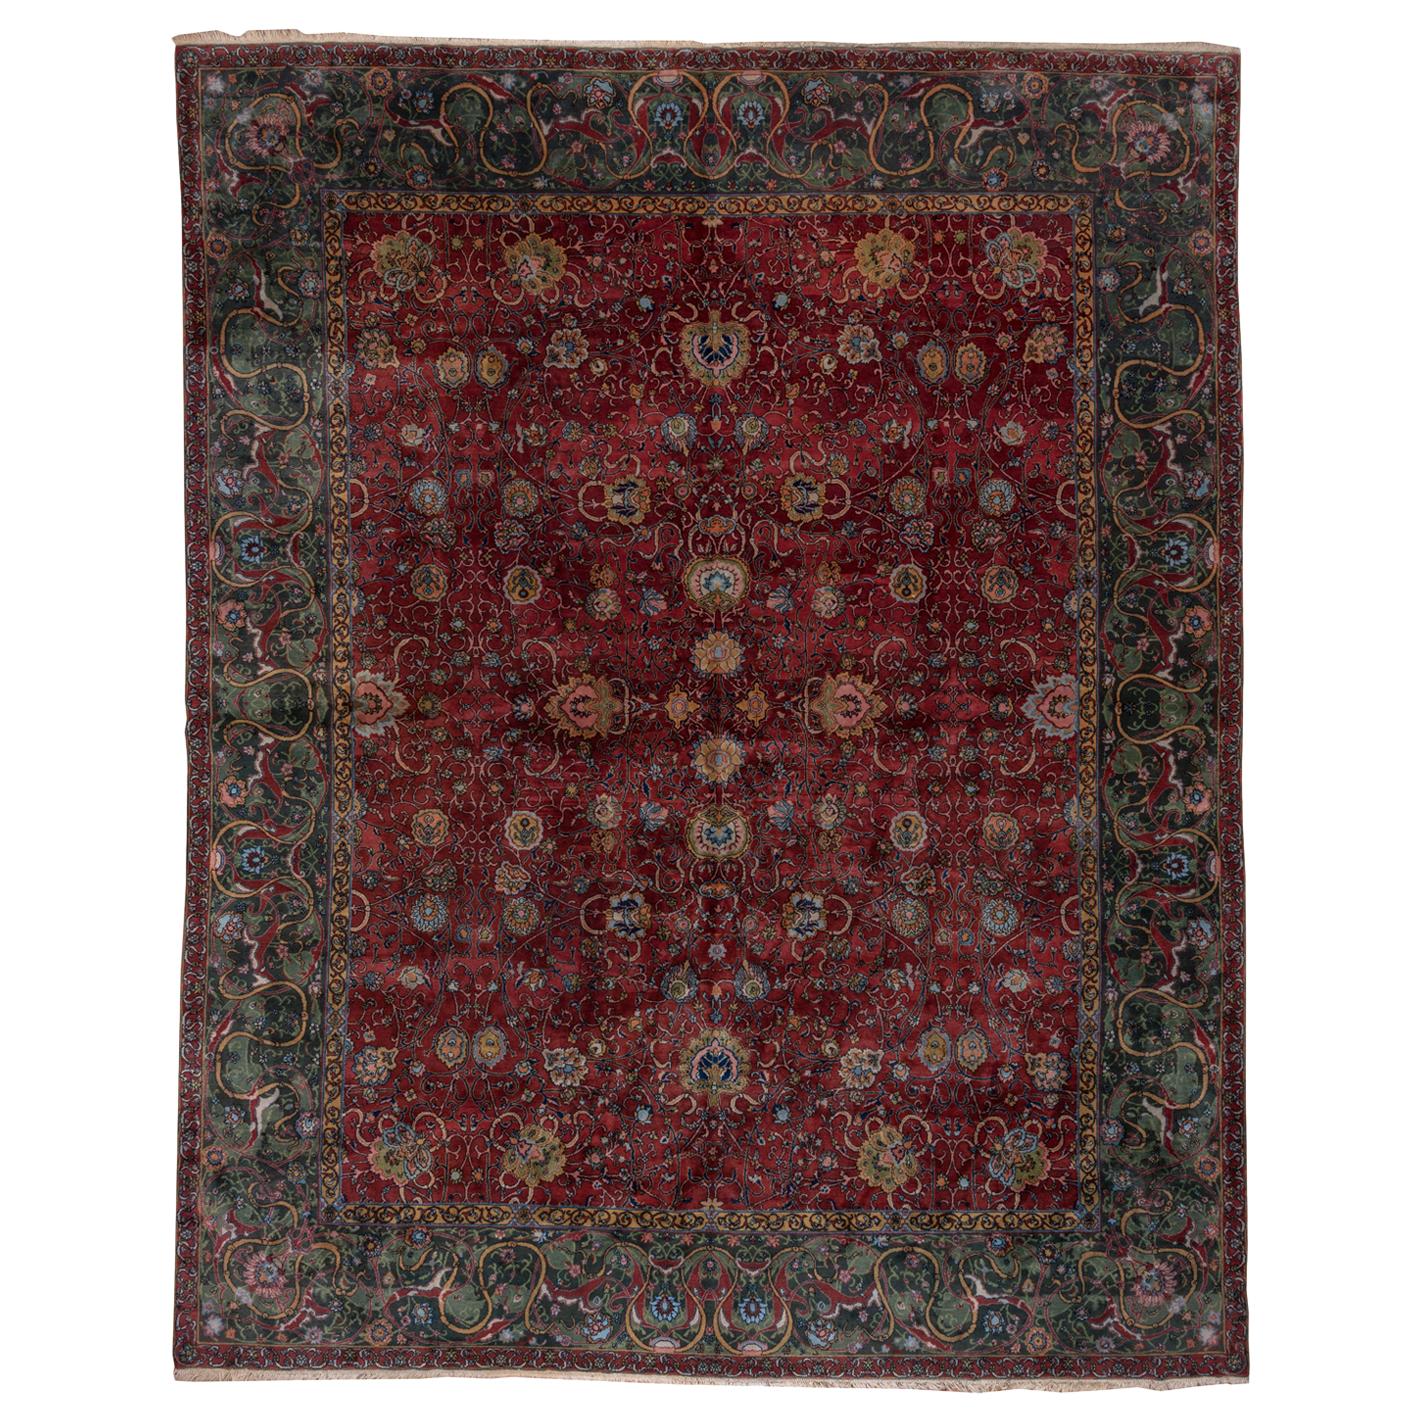 1920s Antique Indian Lahore Rug, Burgundy All-Over Field, Dark Green Borders For Sale